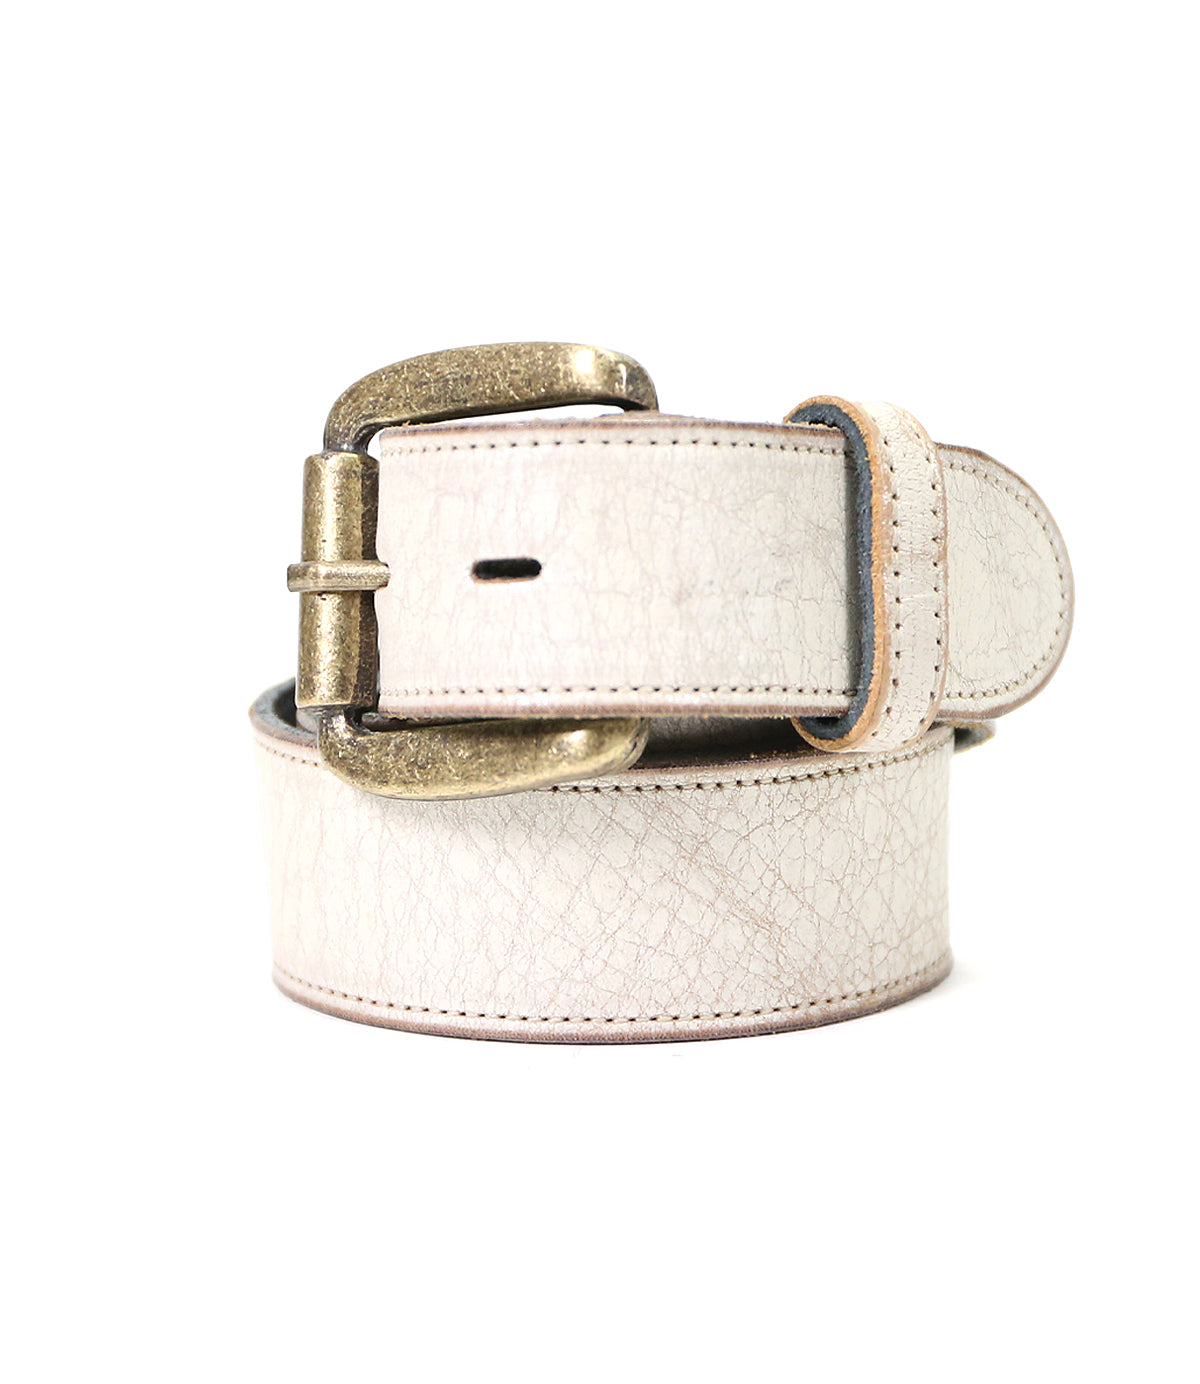 A Meander coiled white leather belt with a removable antique buckle, isolated on a white background.